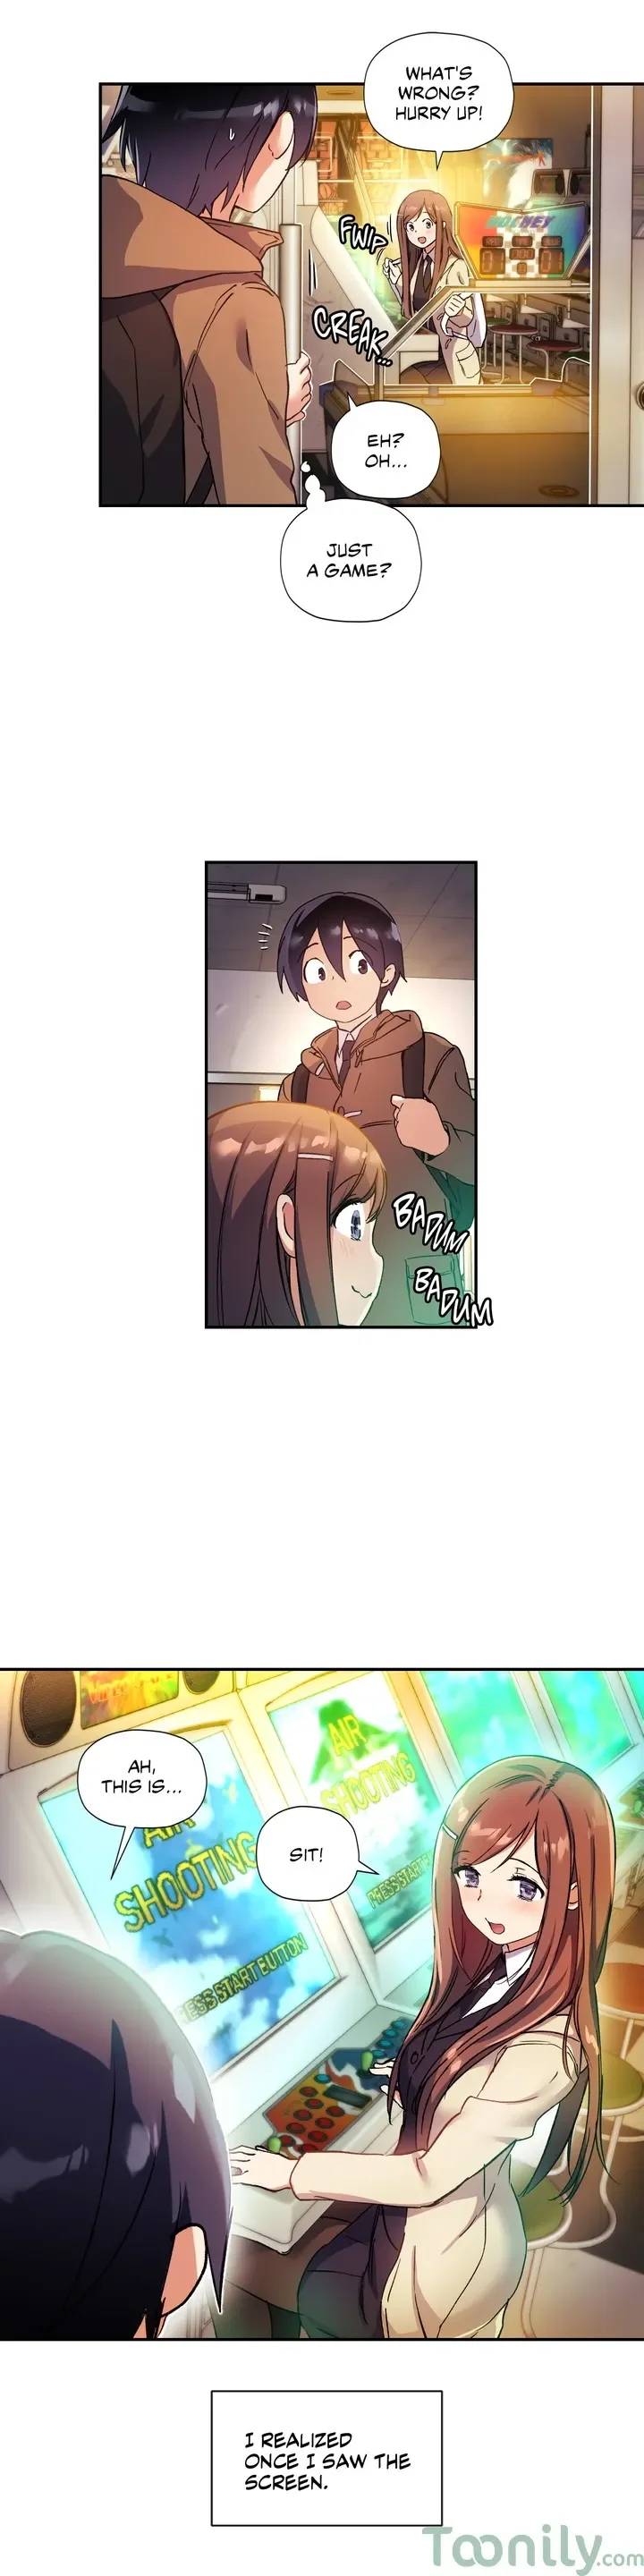 under-observation-my-first-loves-and-i-chap-35-9